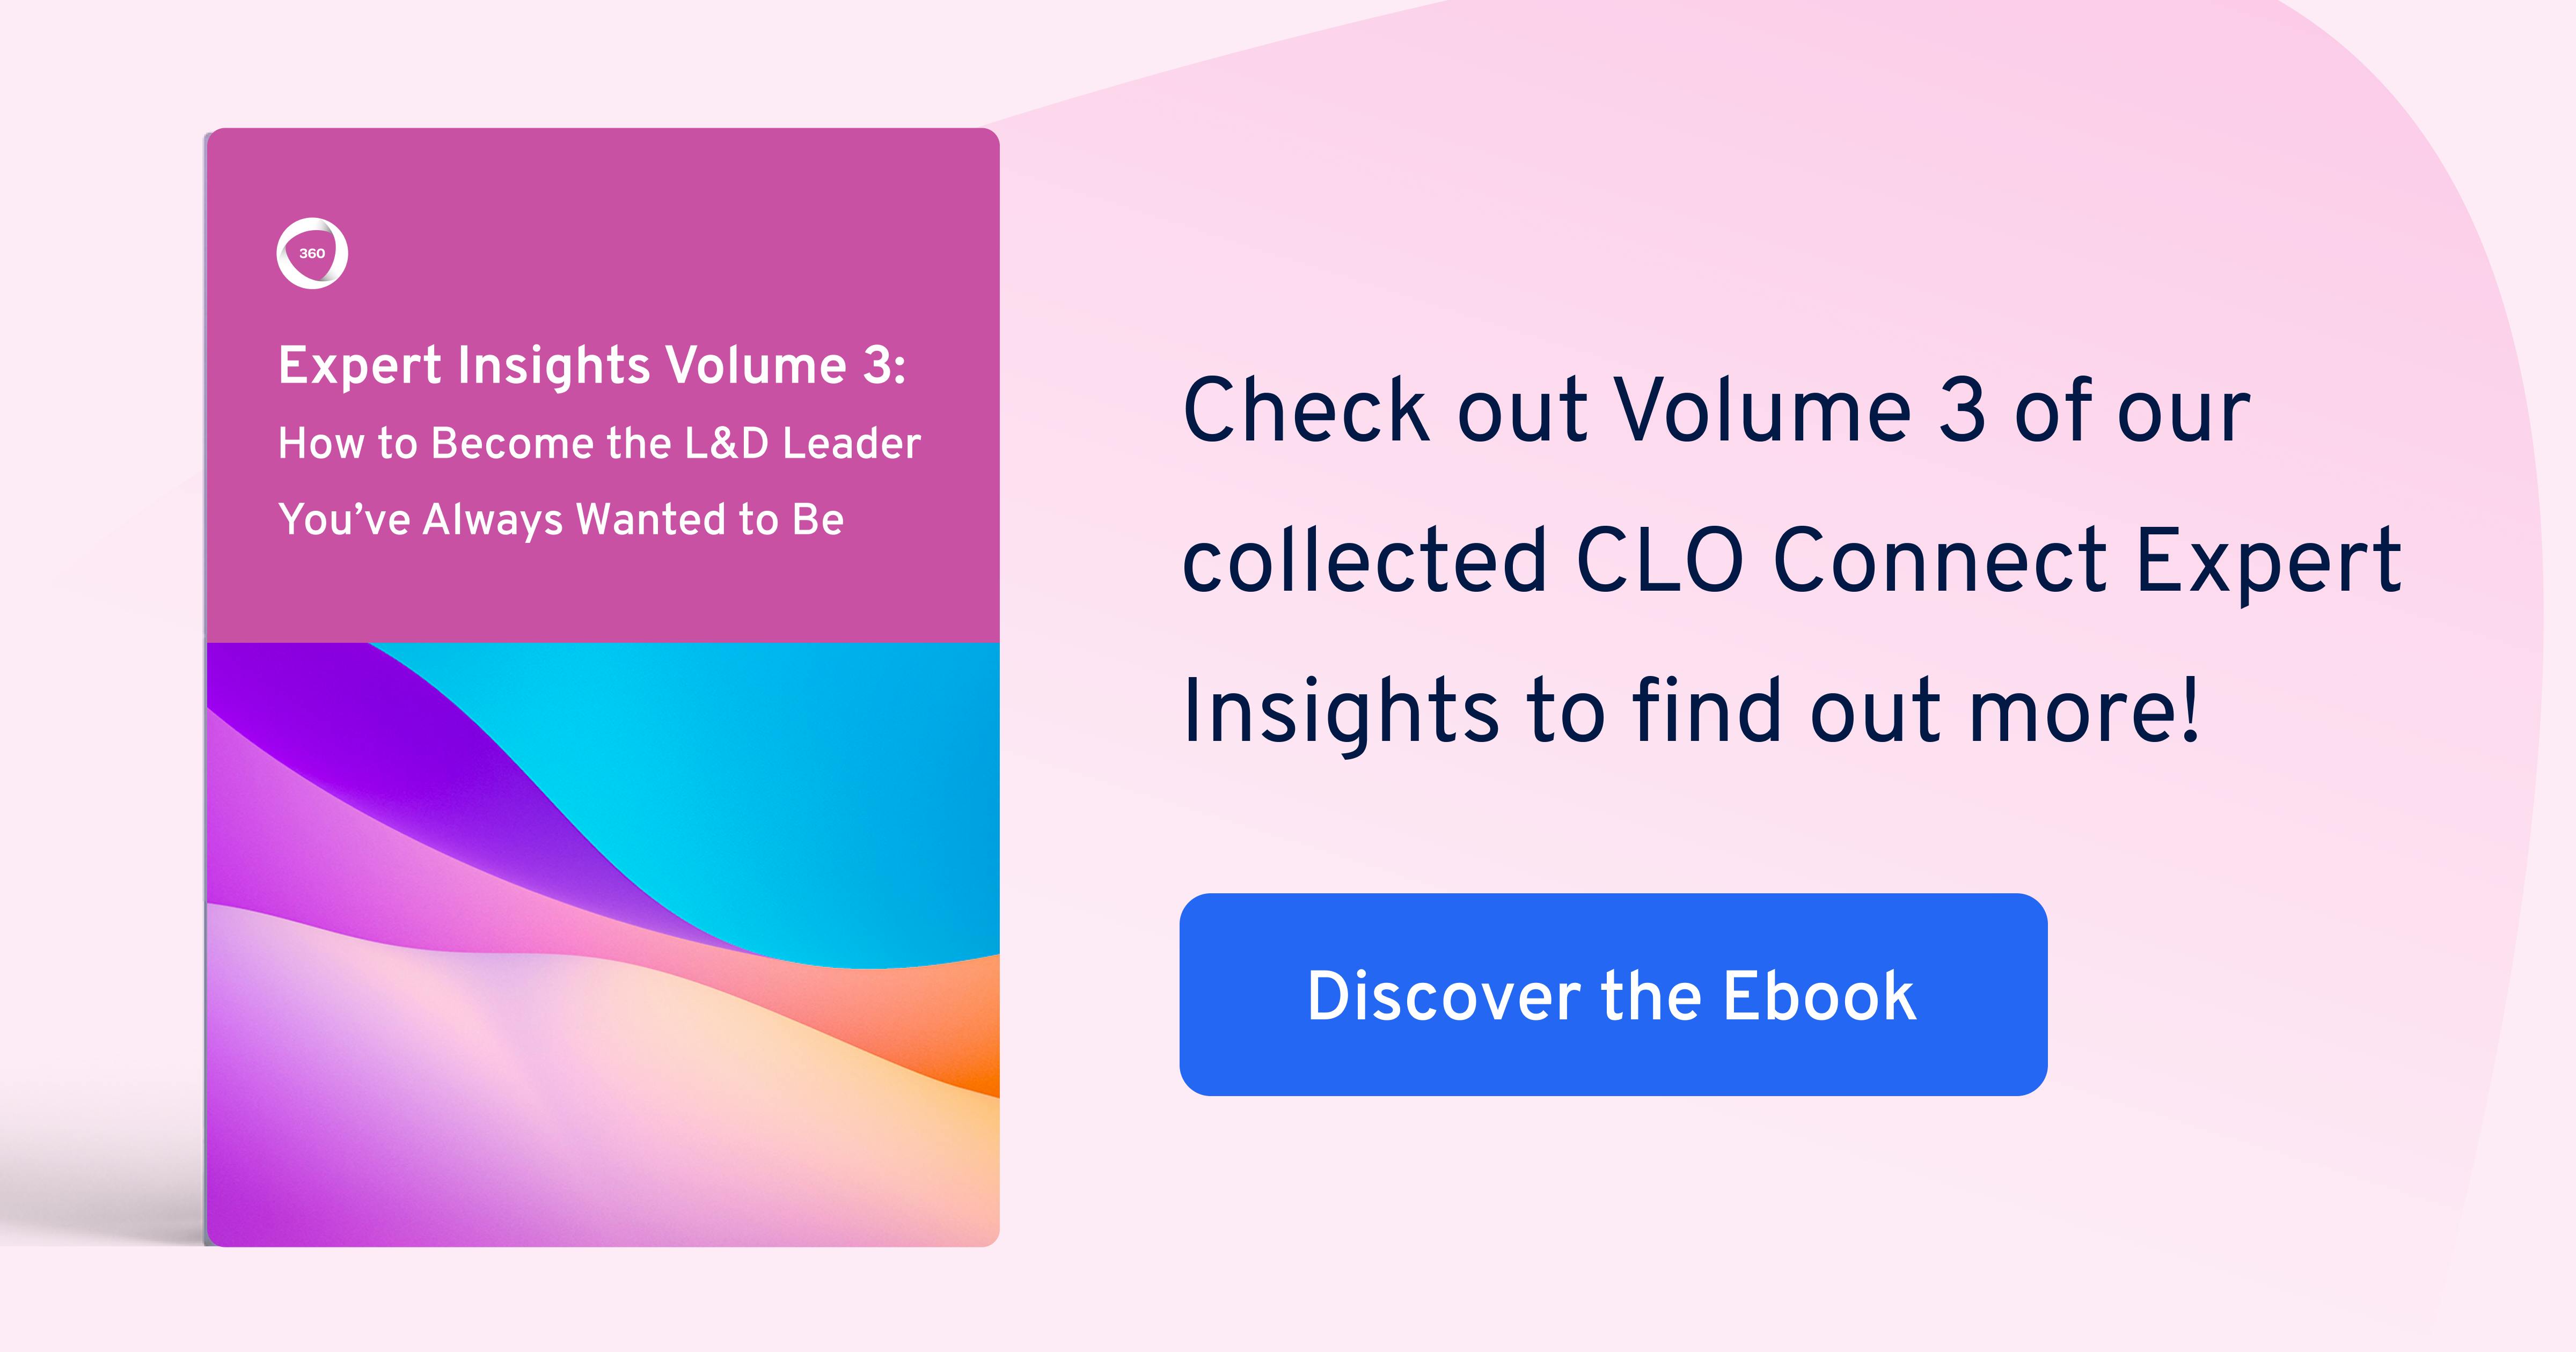 CLO Connect Expert Insights Volume 3